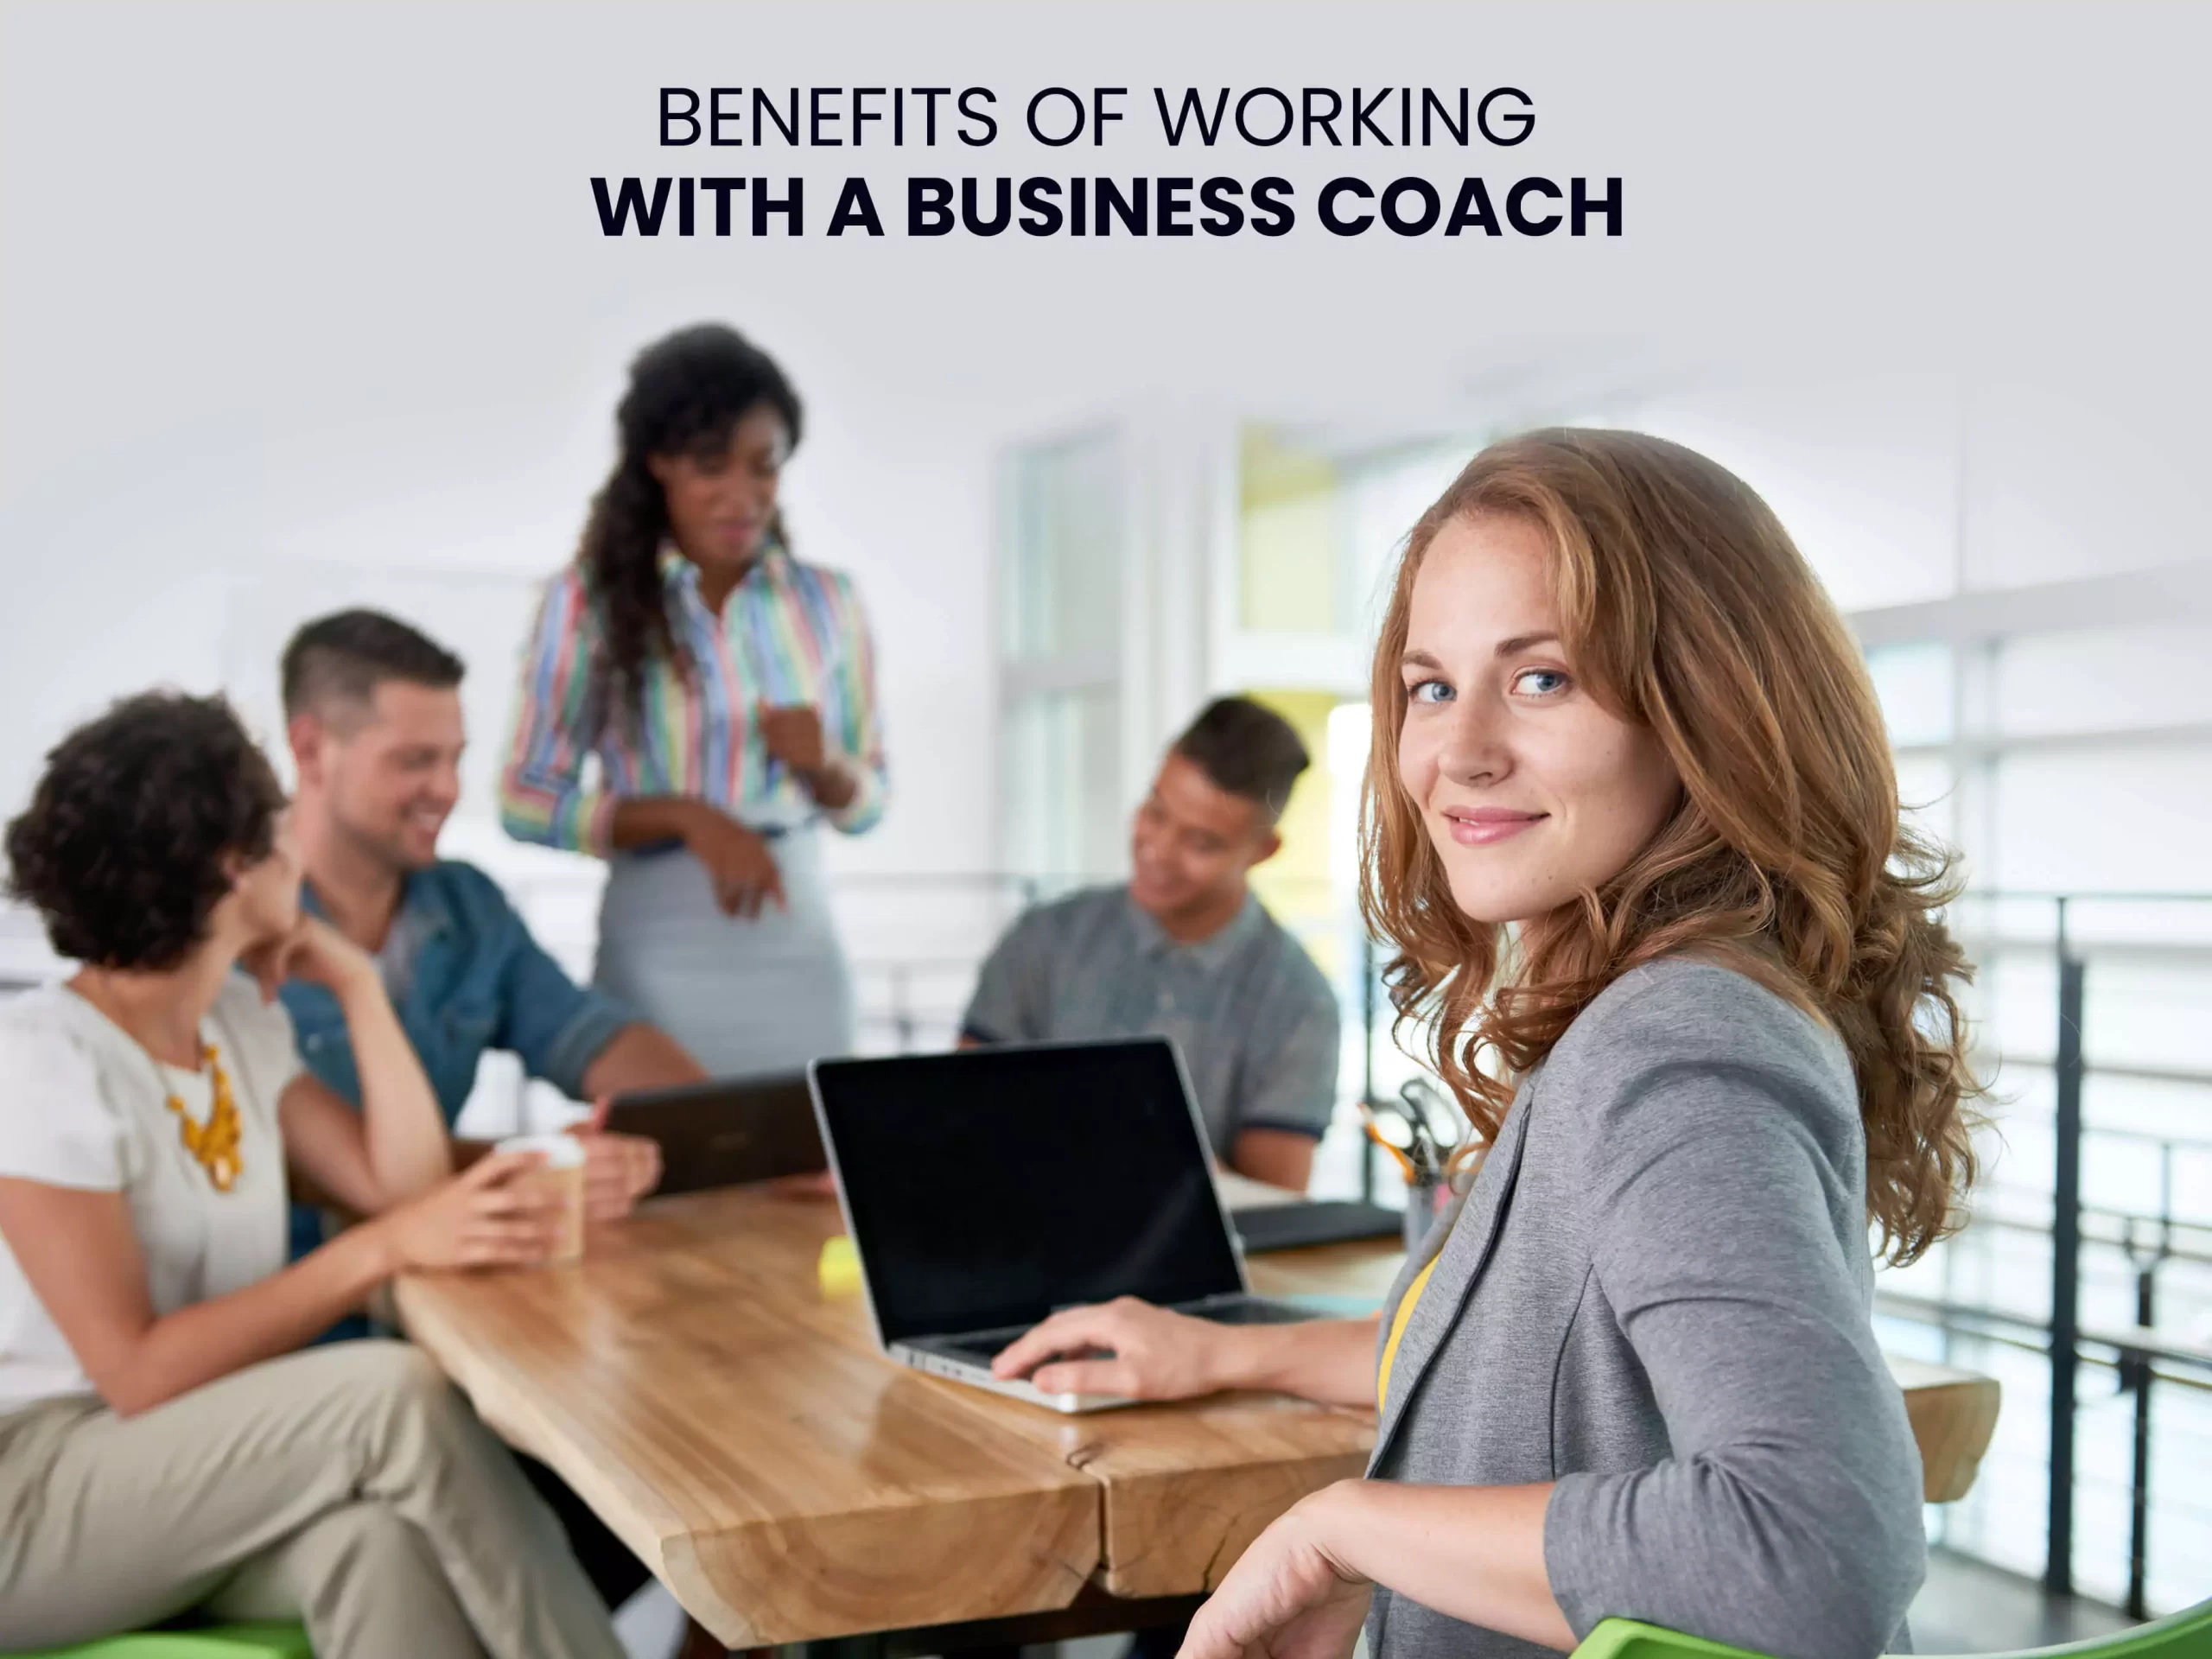 Benefits of Working with a Business Coach